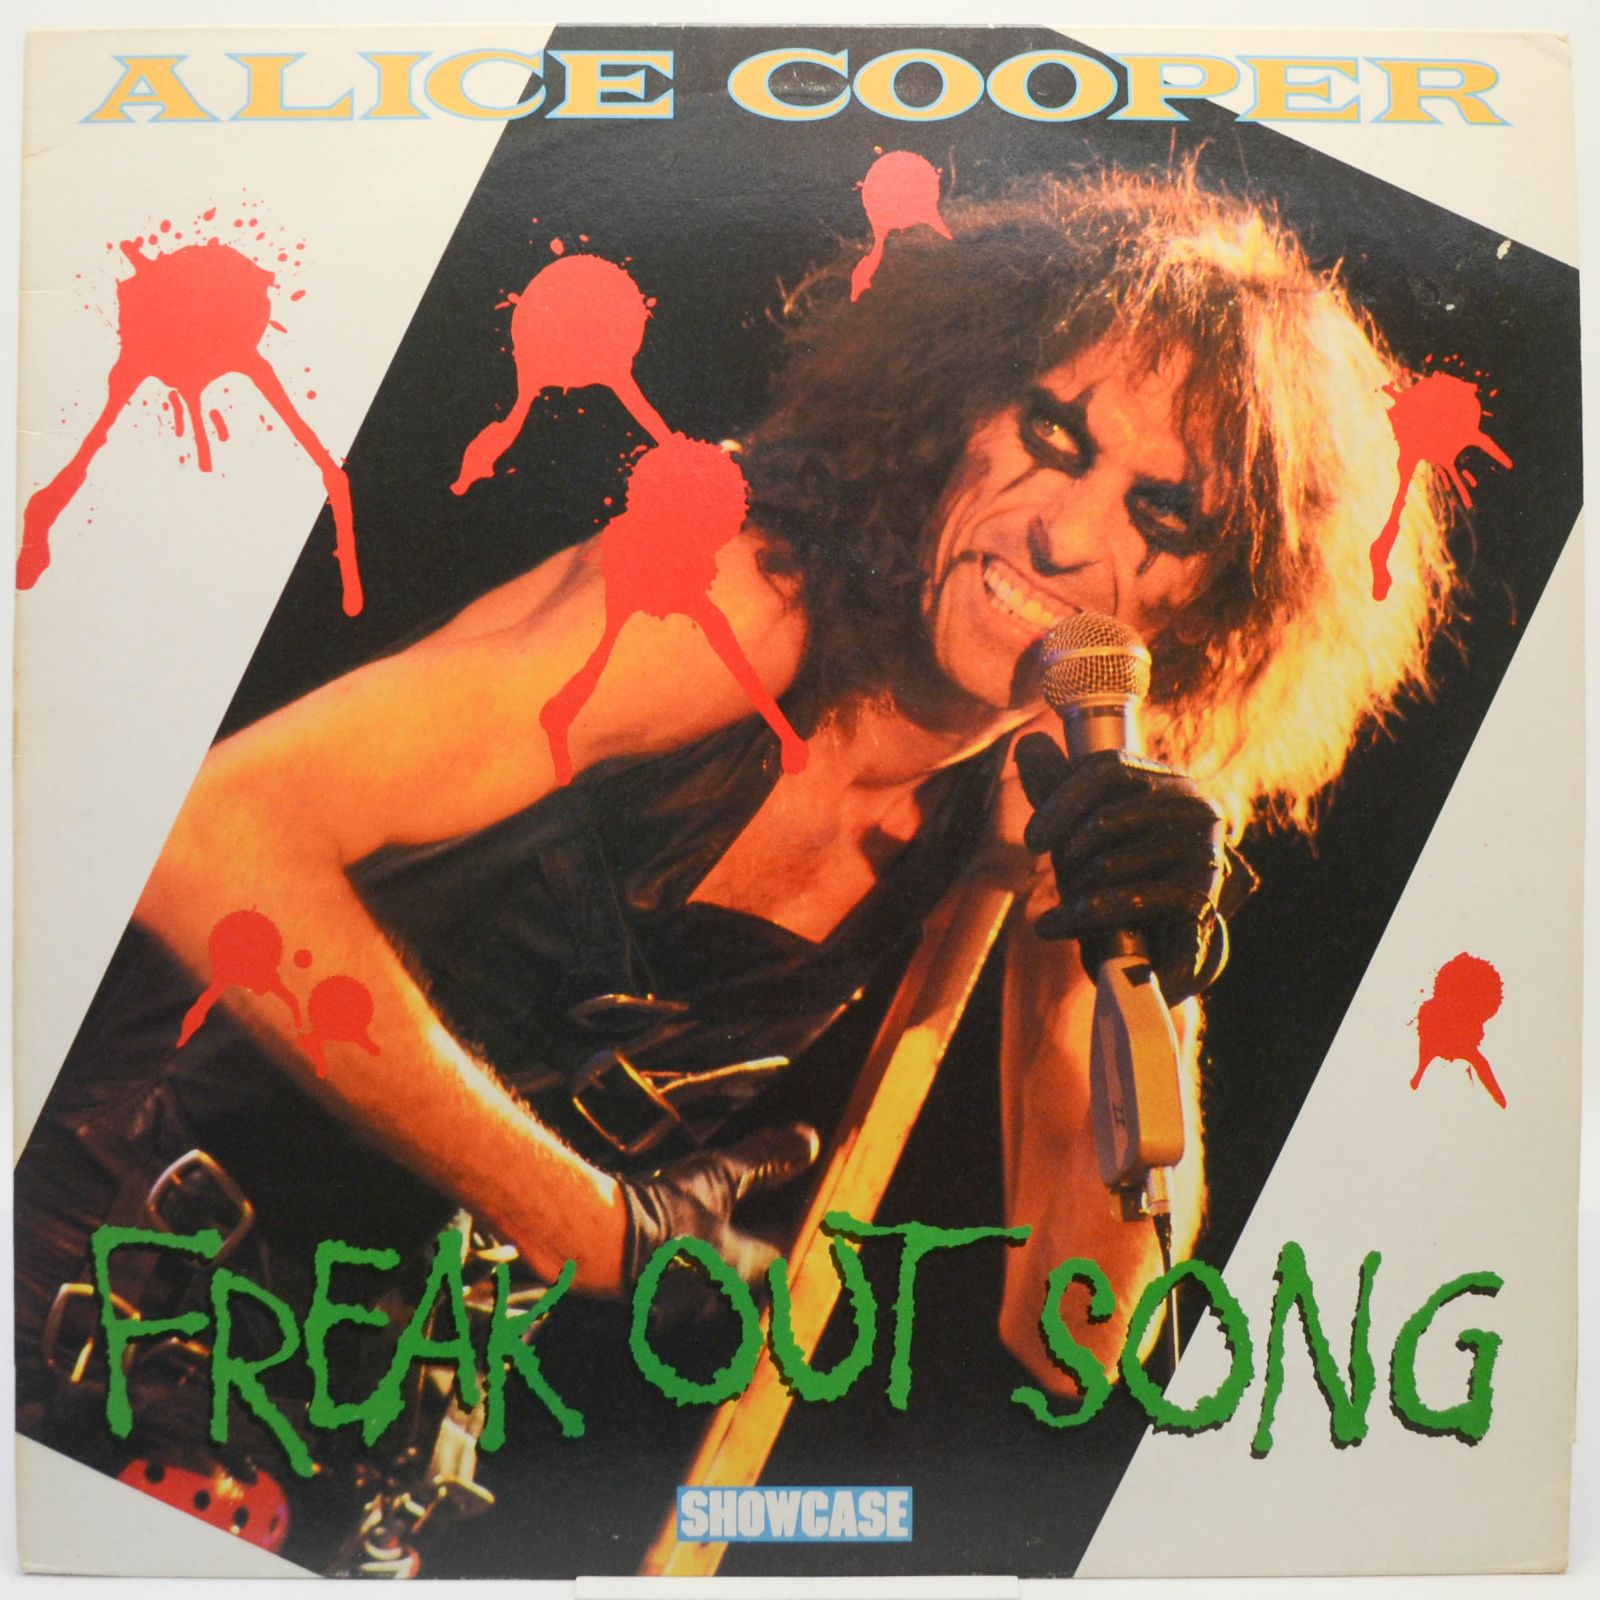 Alice Cooper — Freak Out Song (UK), 1985